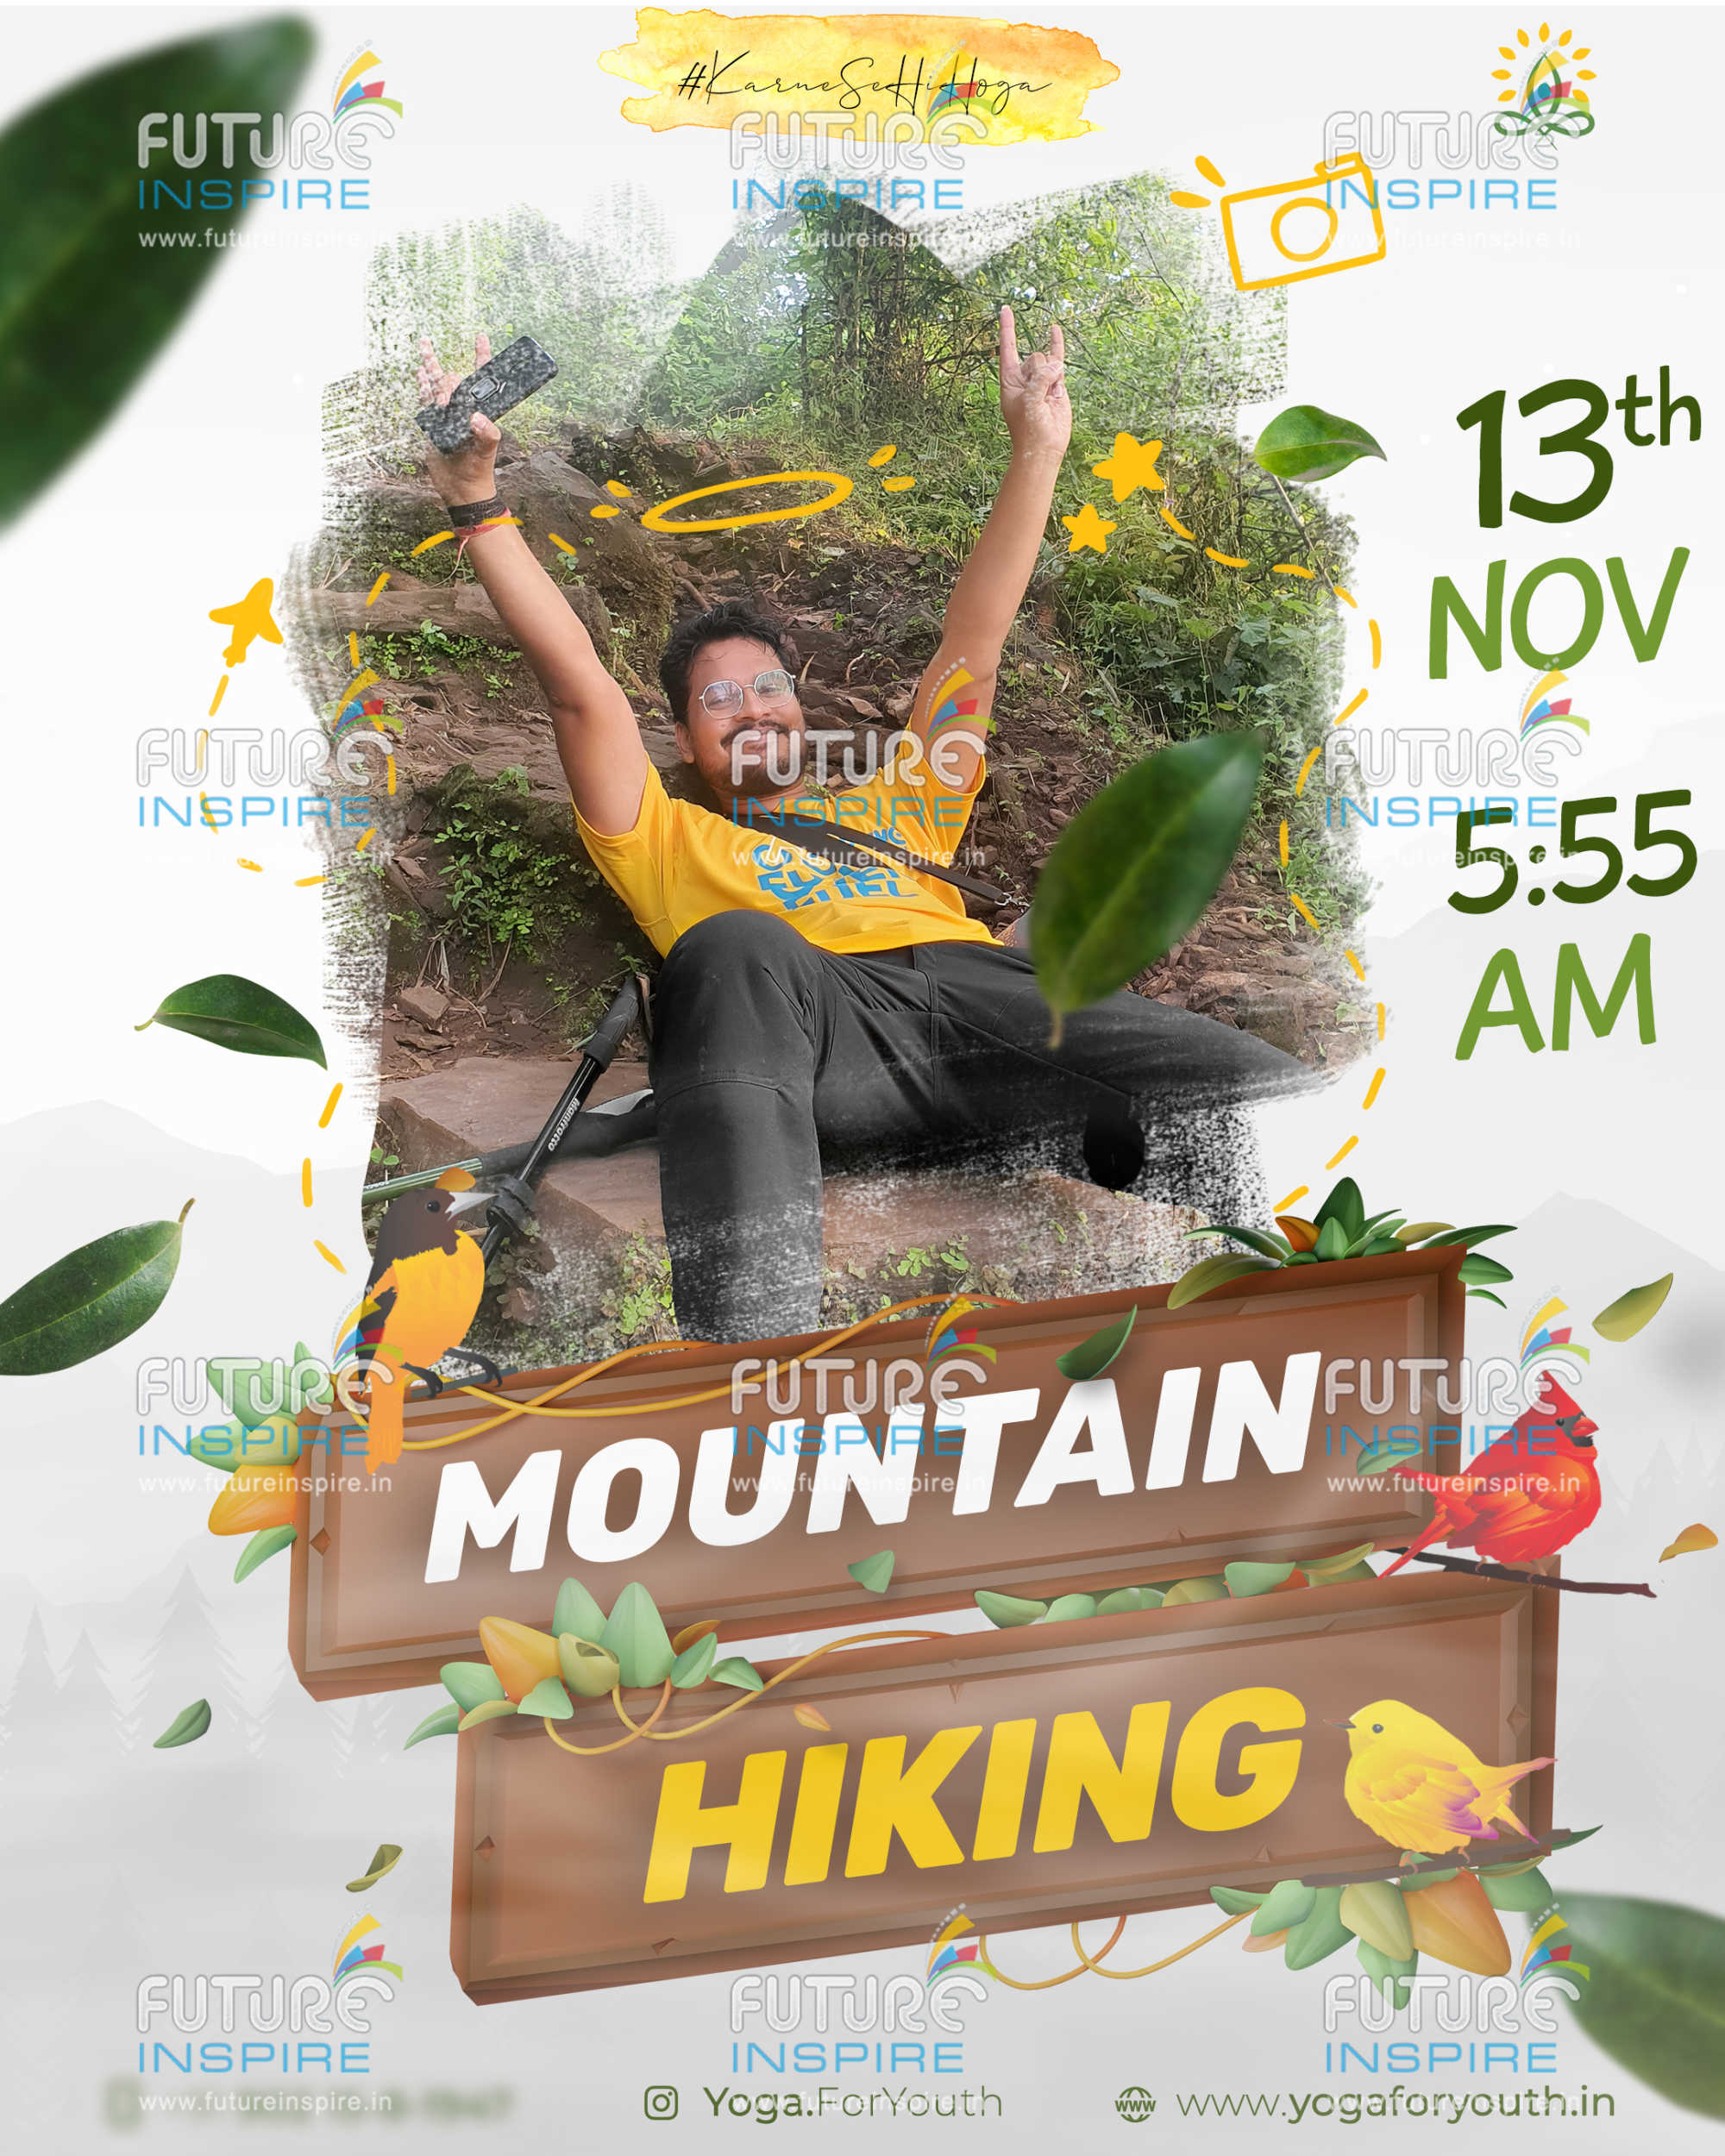 YOGA FOR YOUTH 2.0 1st SUNDAY Hiking Nature Walk Poster 03